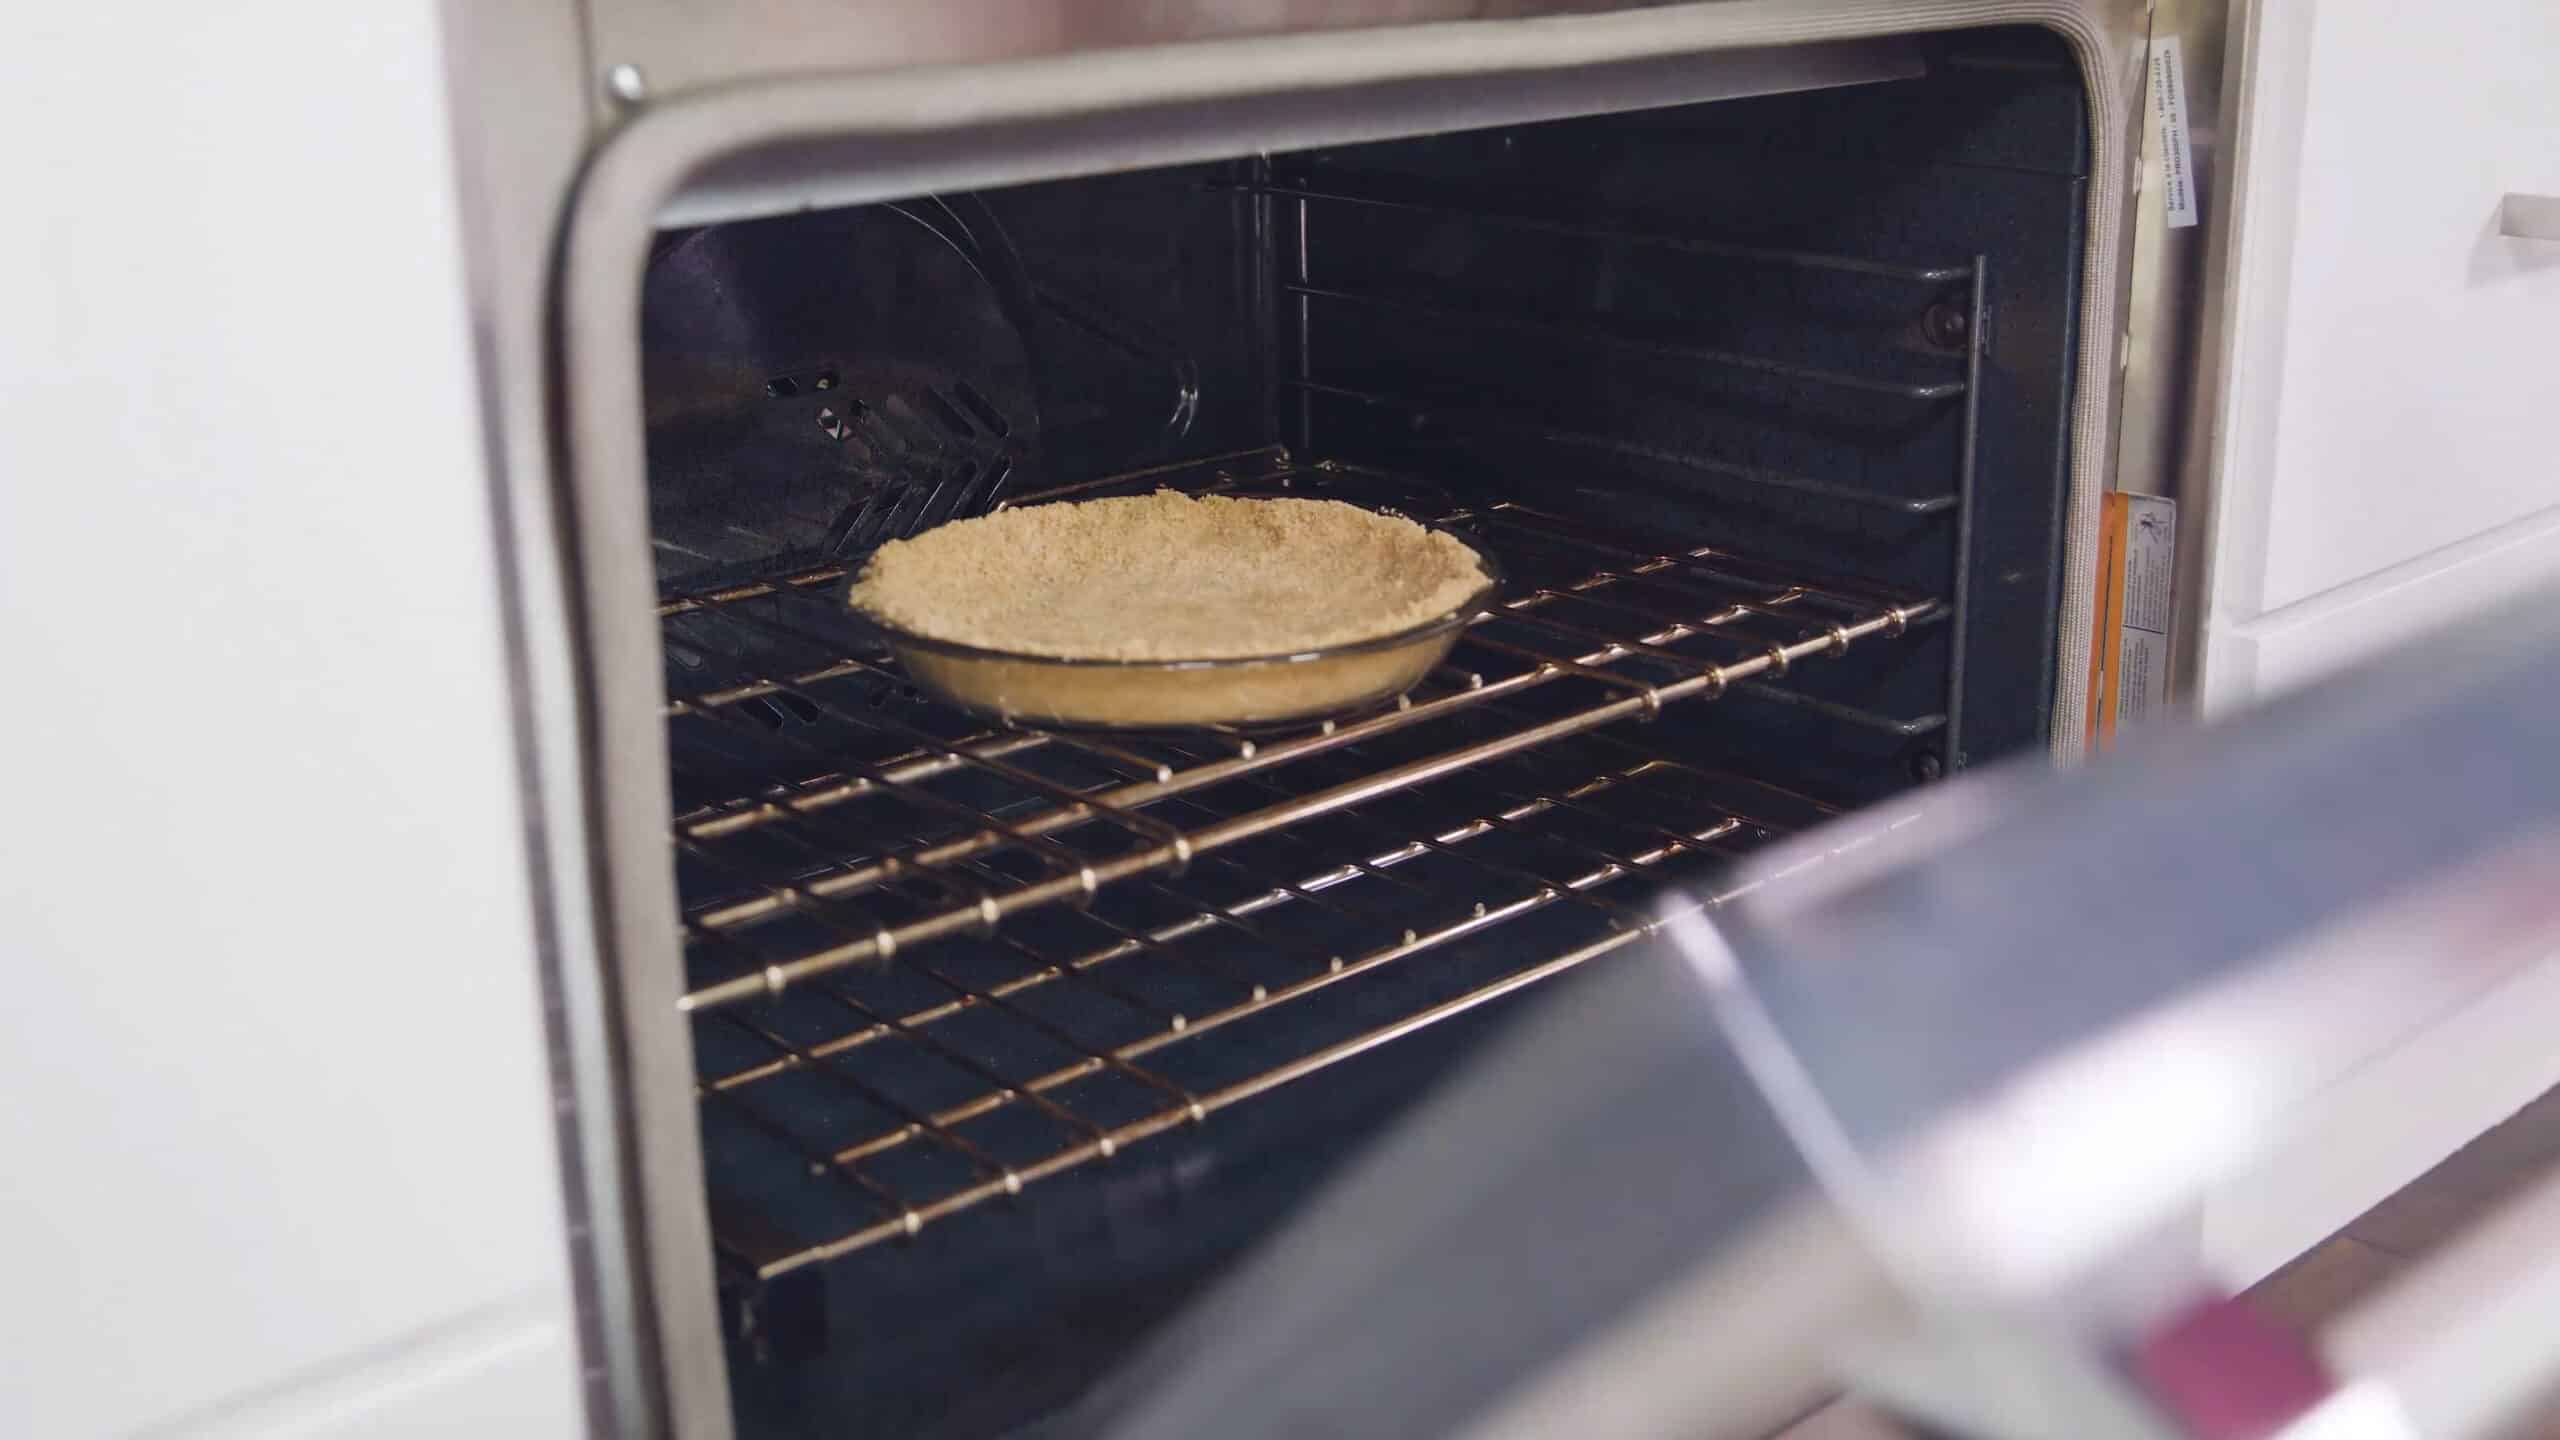 Angled view of open oven with clear glass pie plate with formed graham cracker crust inside placed on a rack in the middle of the oven.